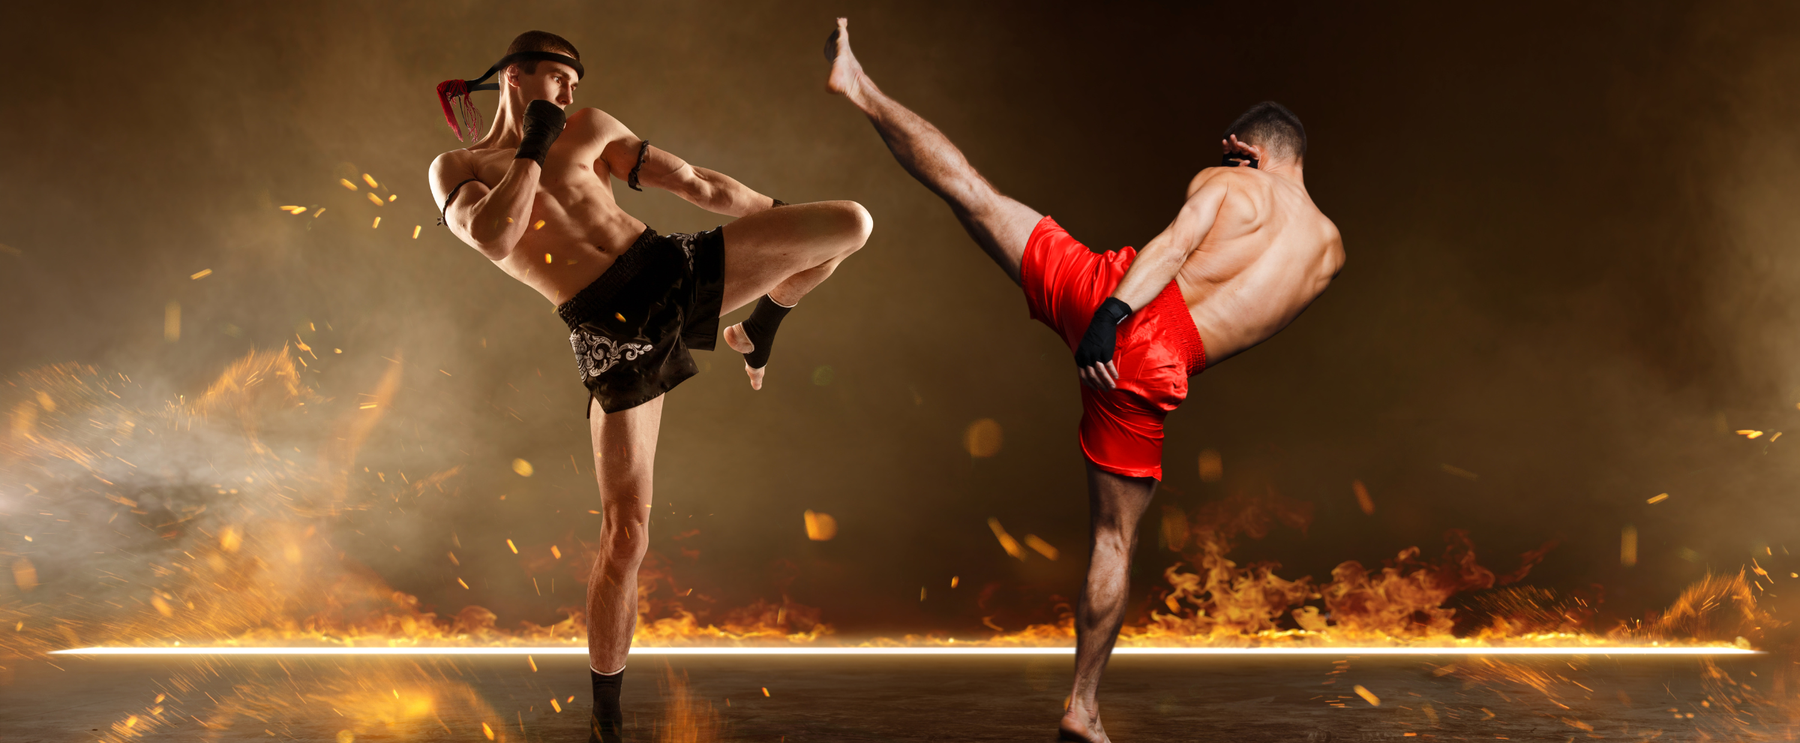 FightCamp - Muay Thai vs Kickboxing: What's the Difference?